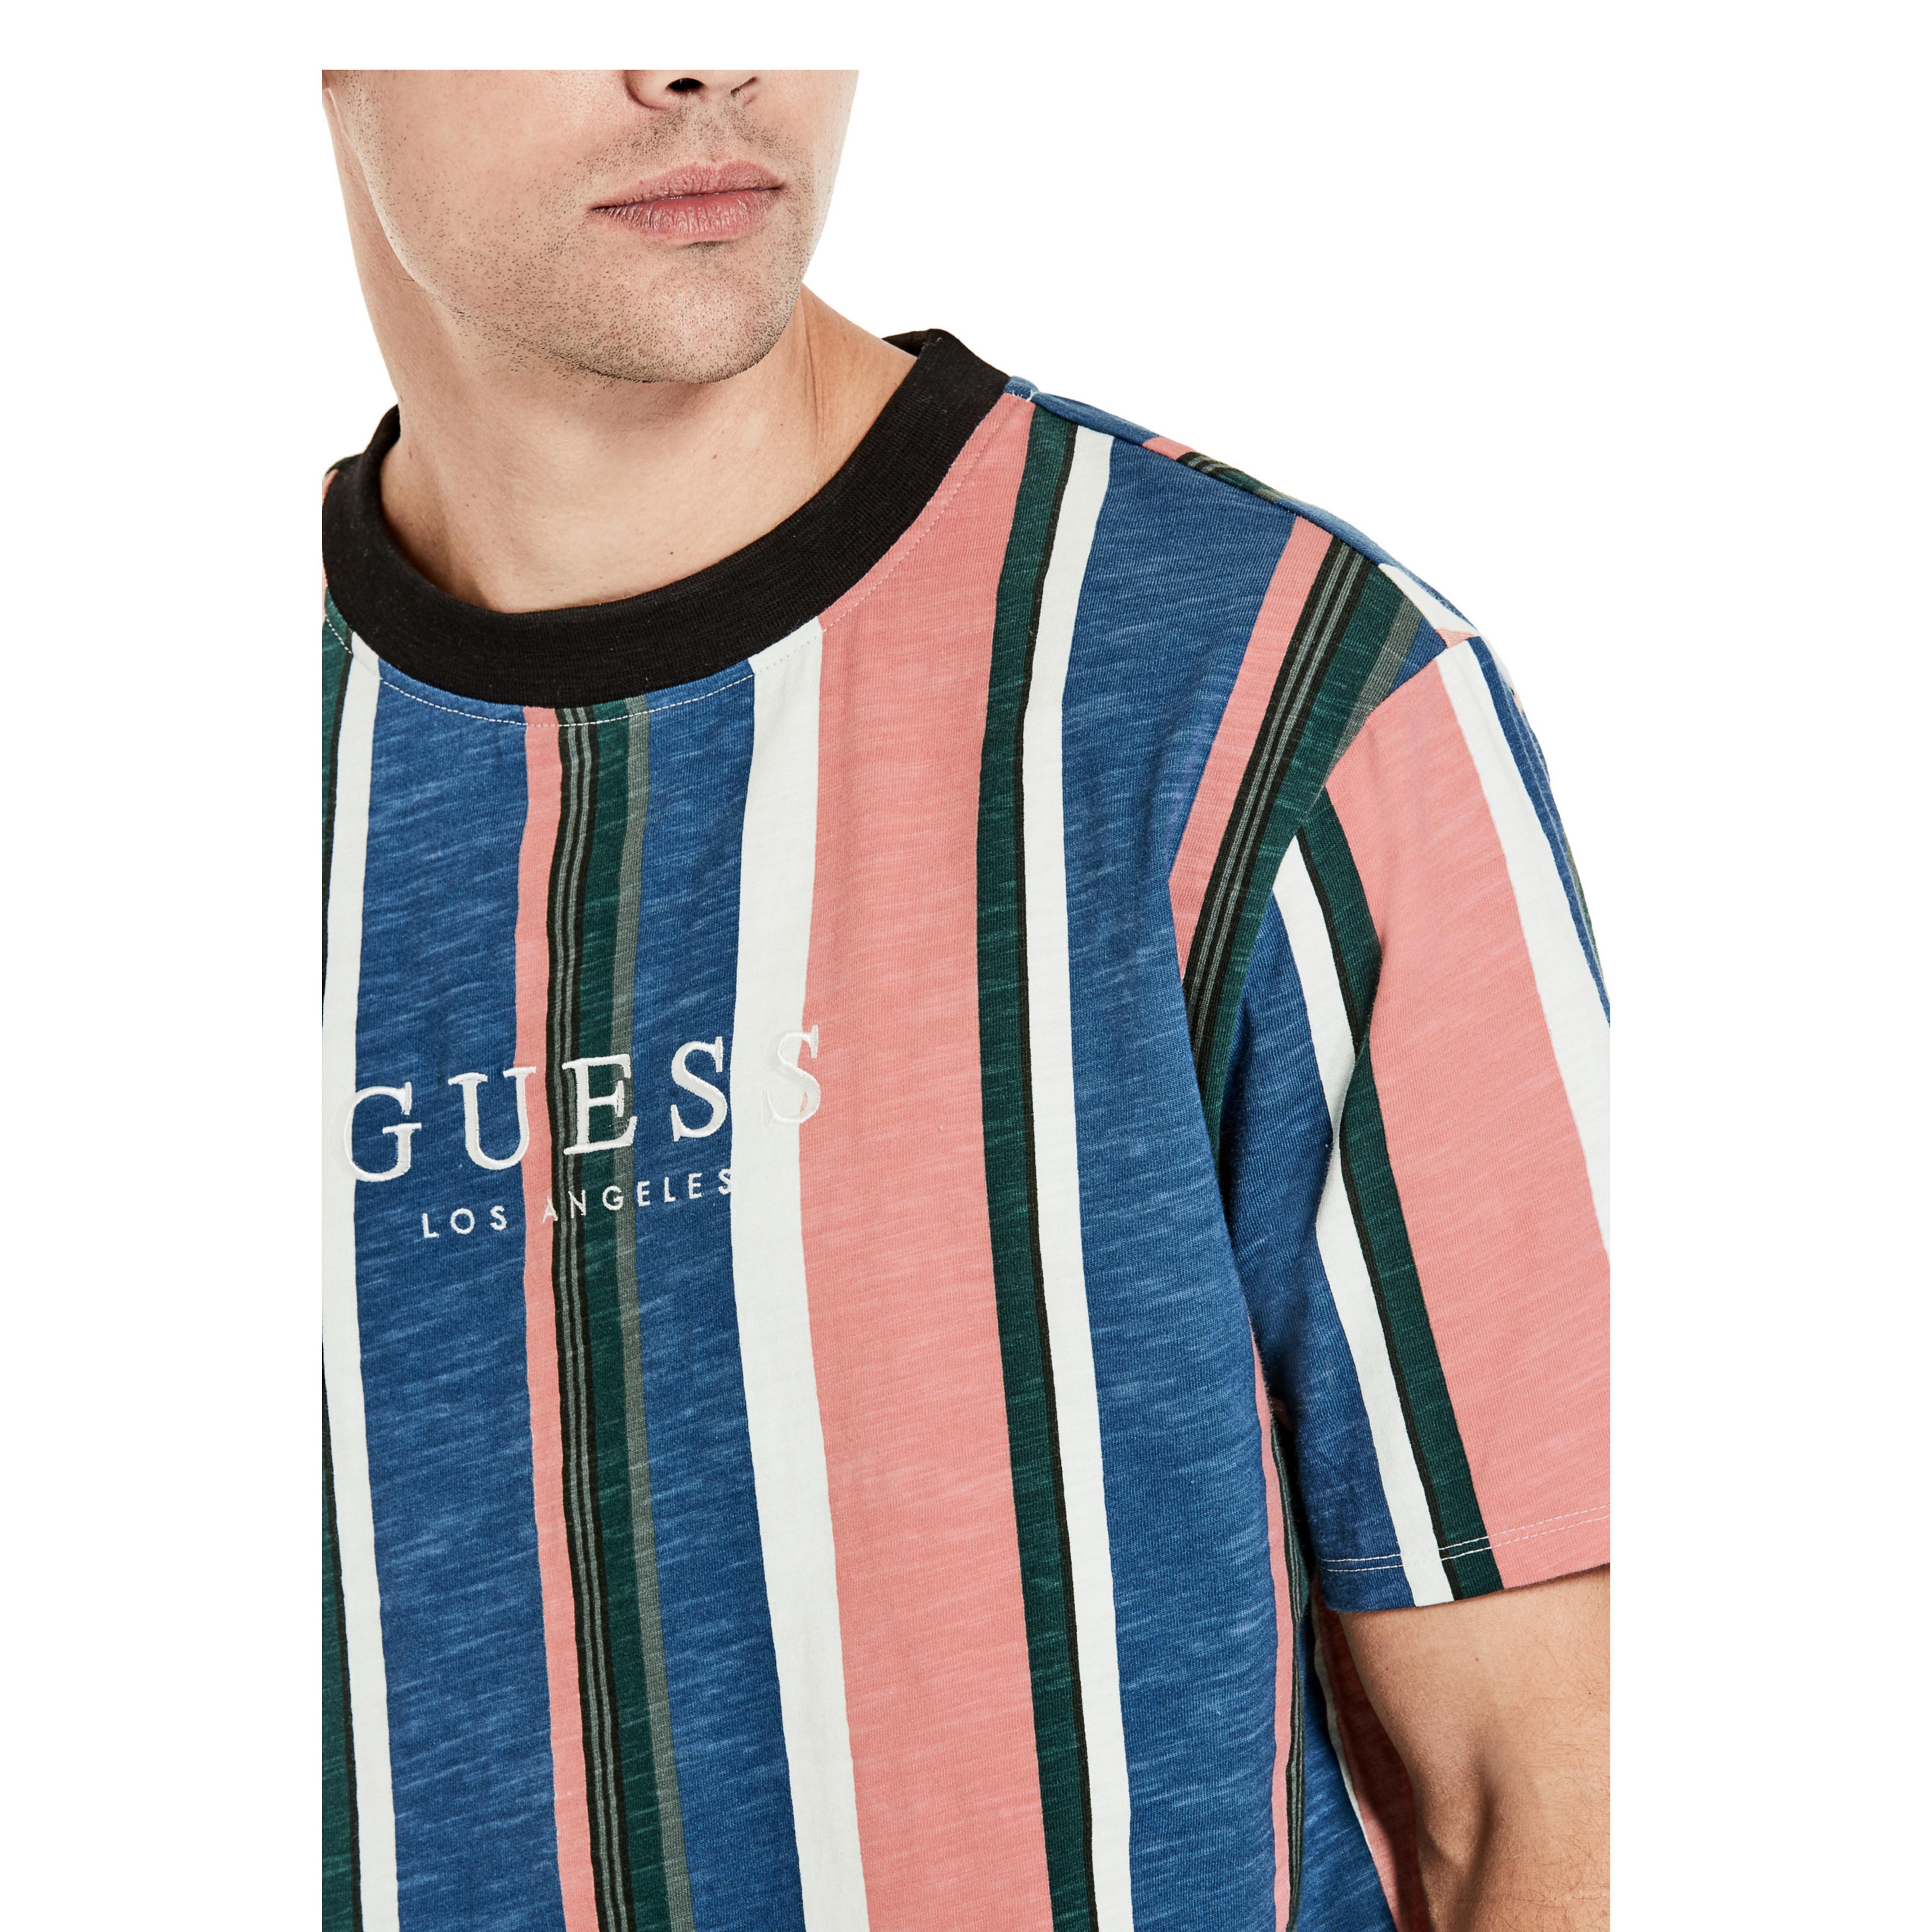 Guess Sayer Tee Latest Styles, 49% OFF | maikyaulaw.com